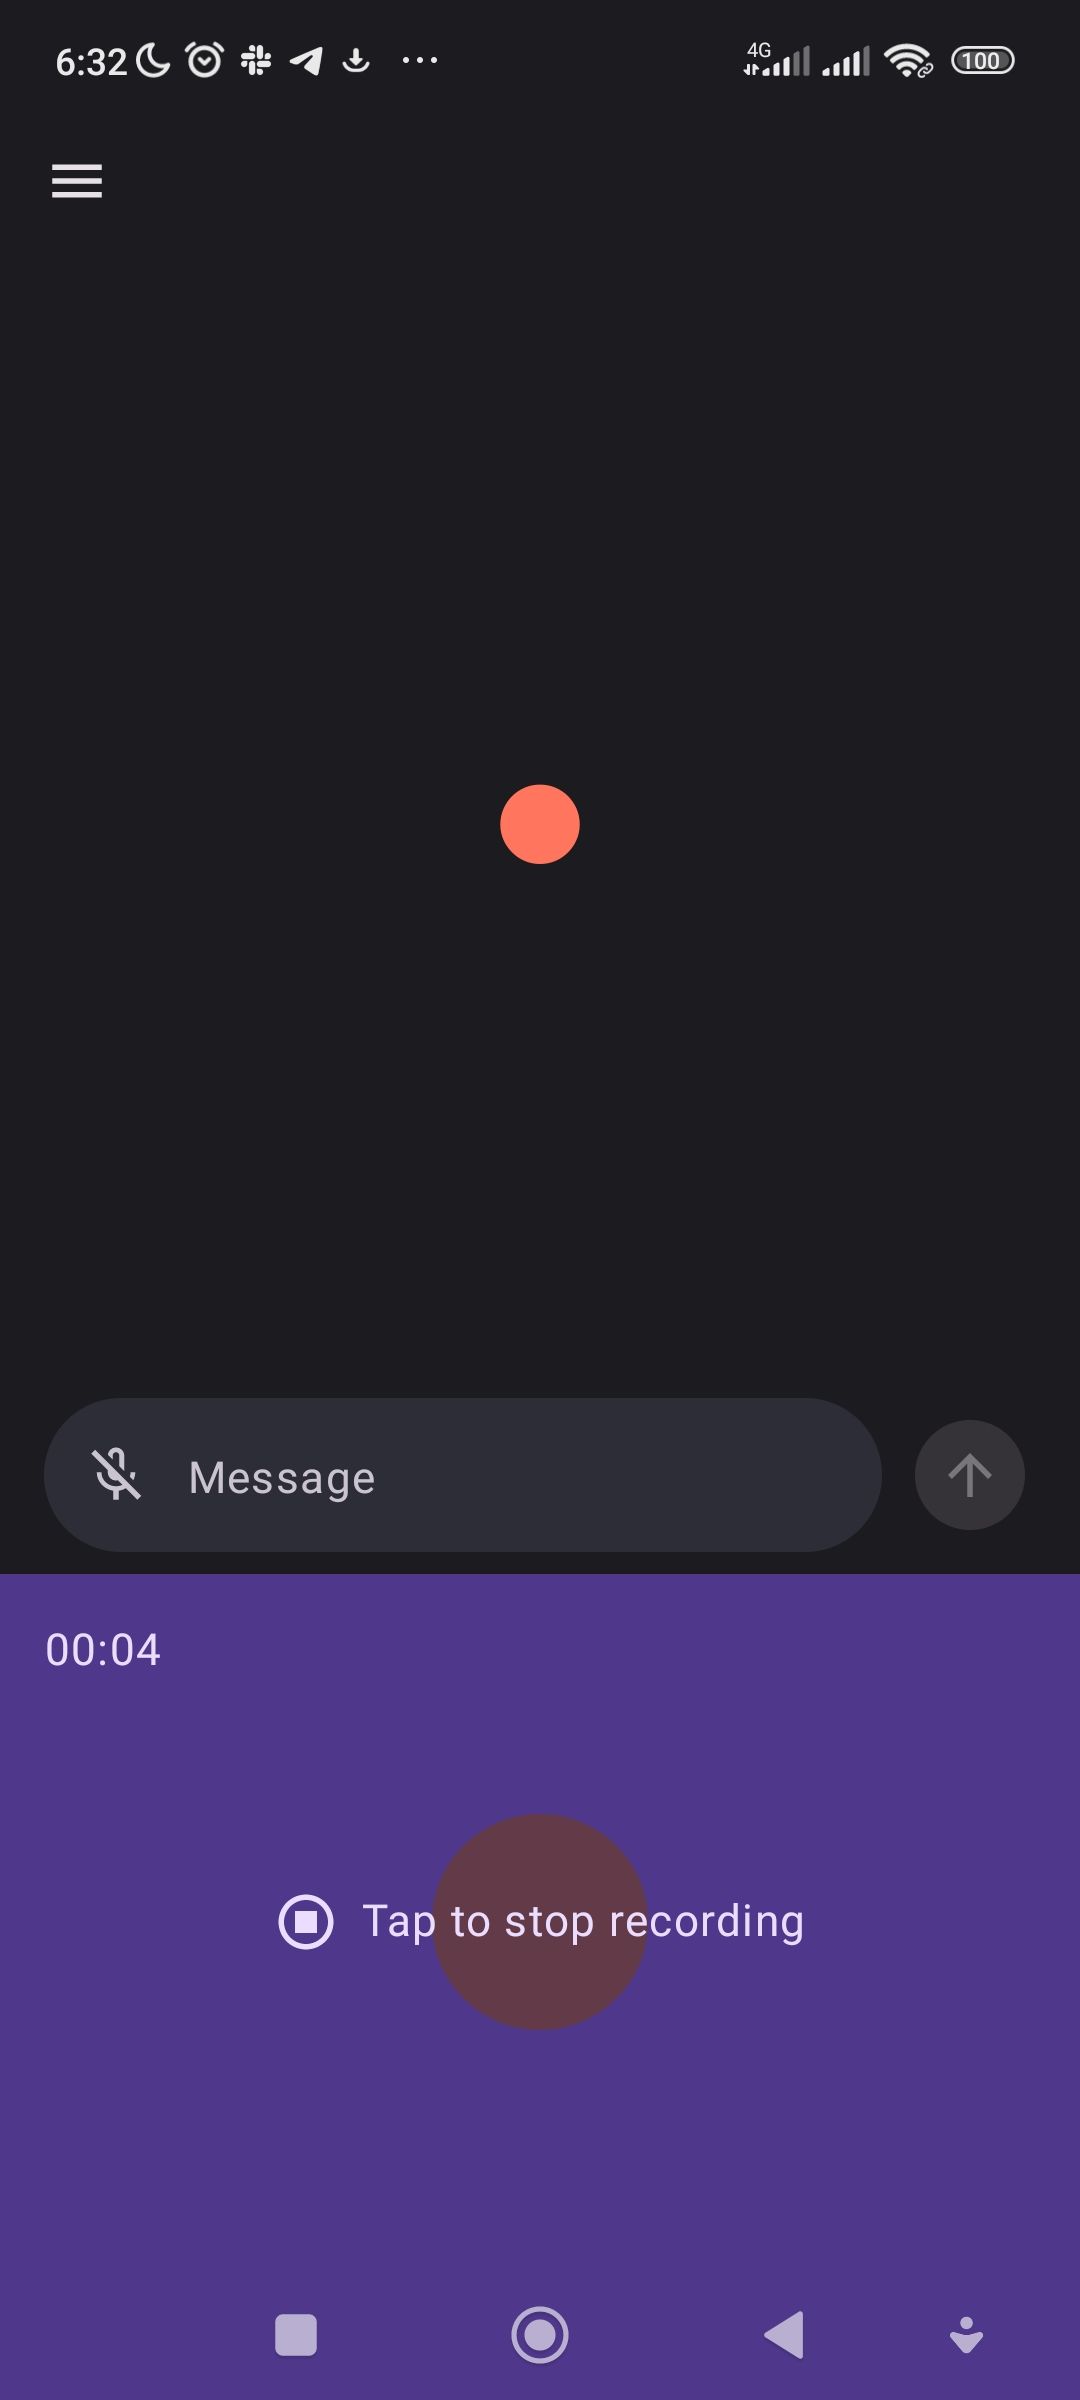 Controlling ChatGPT with your voice using the mobile app